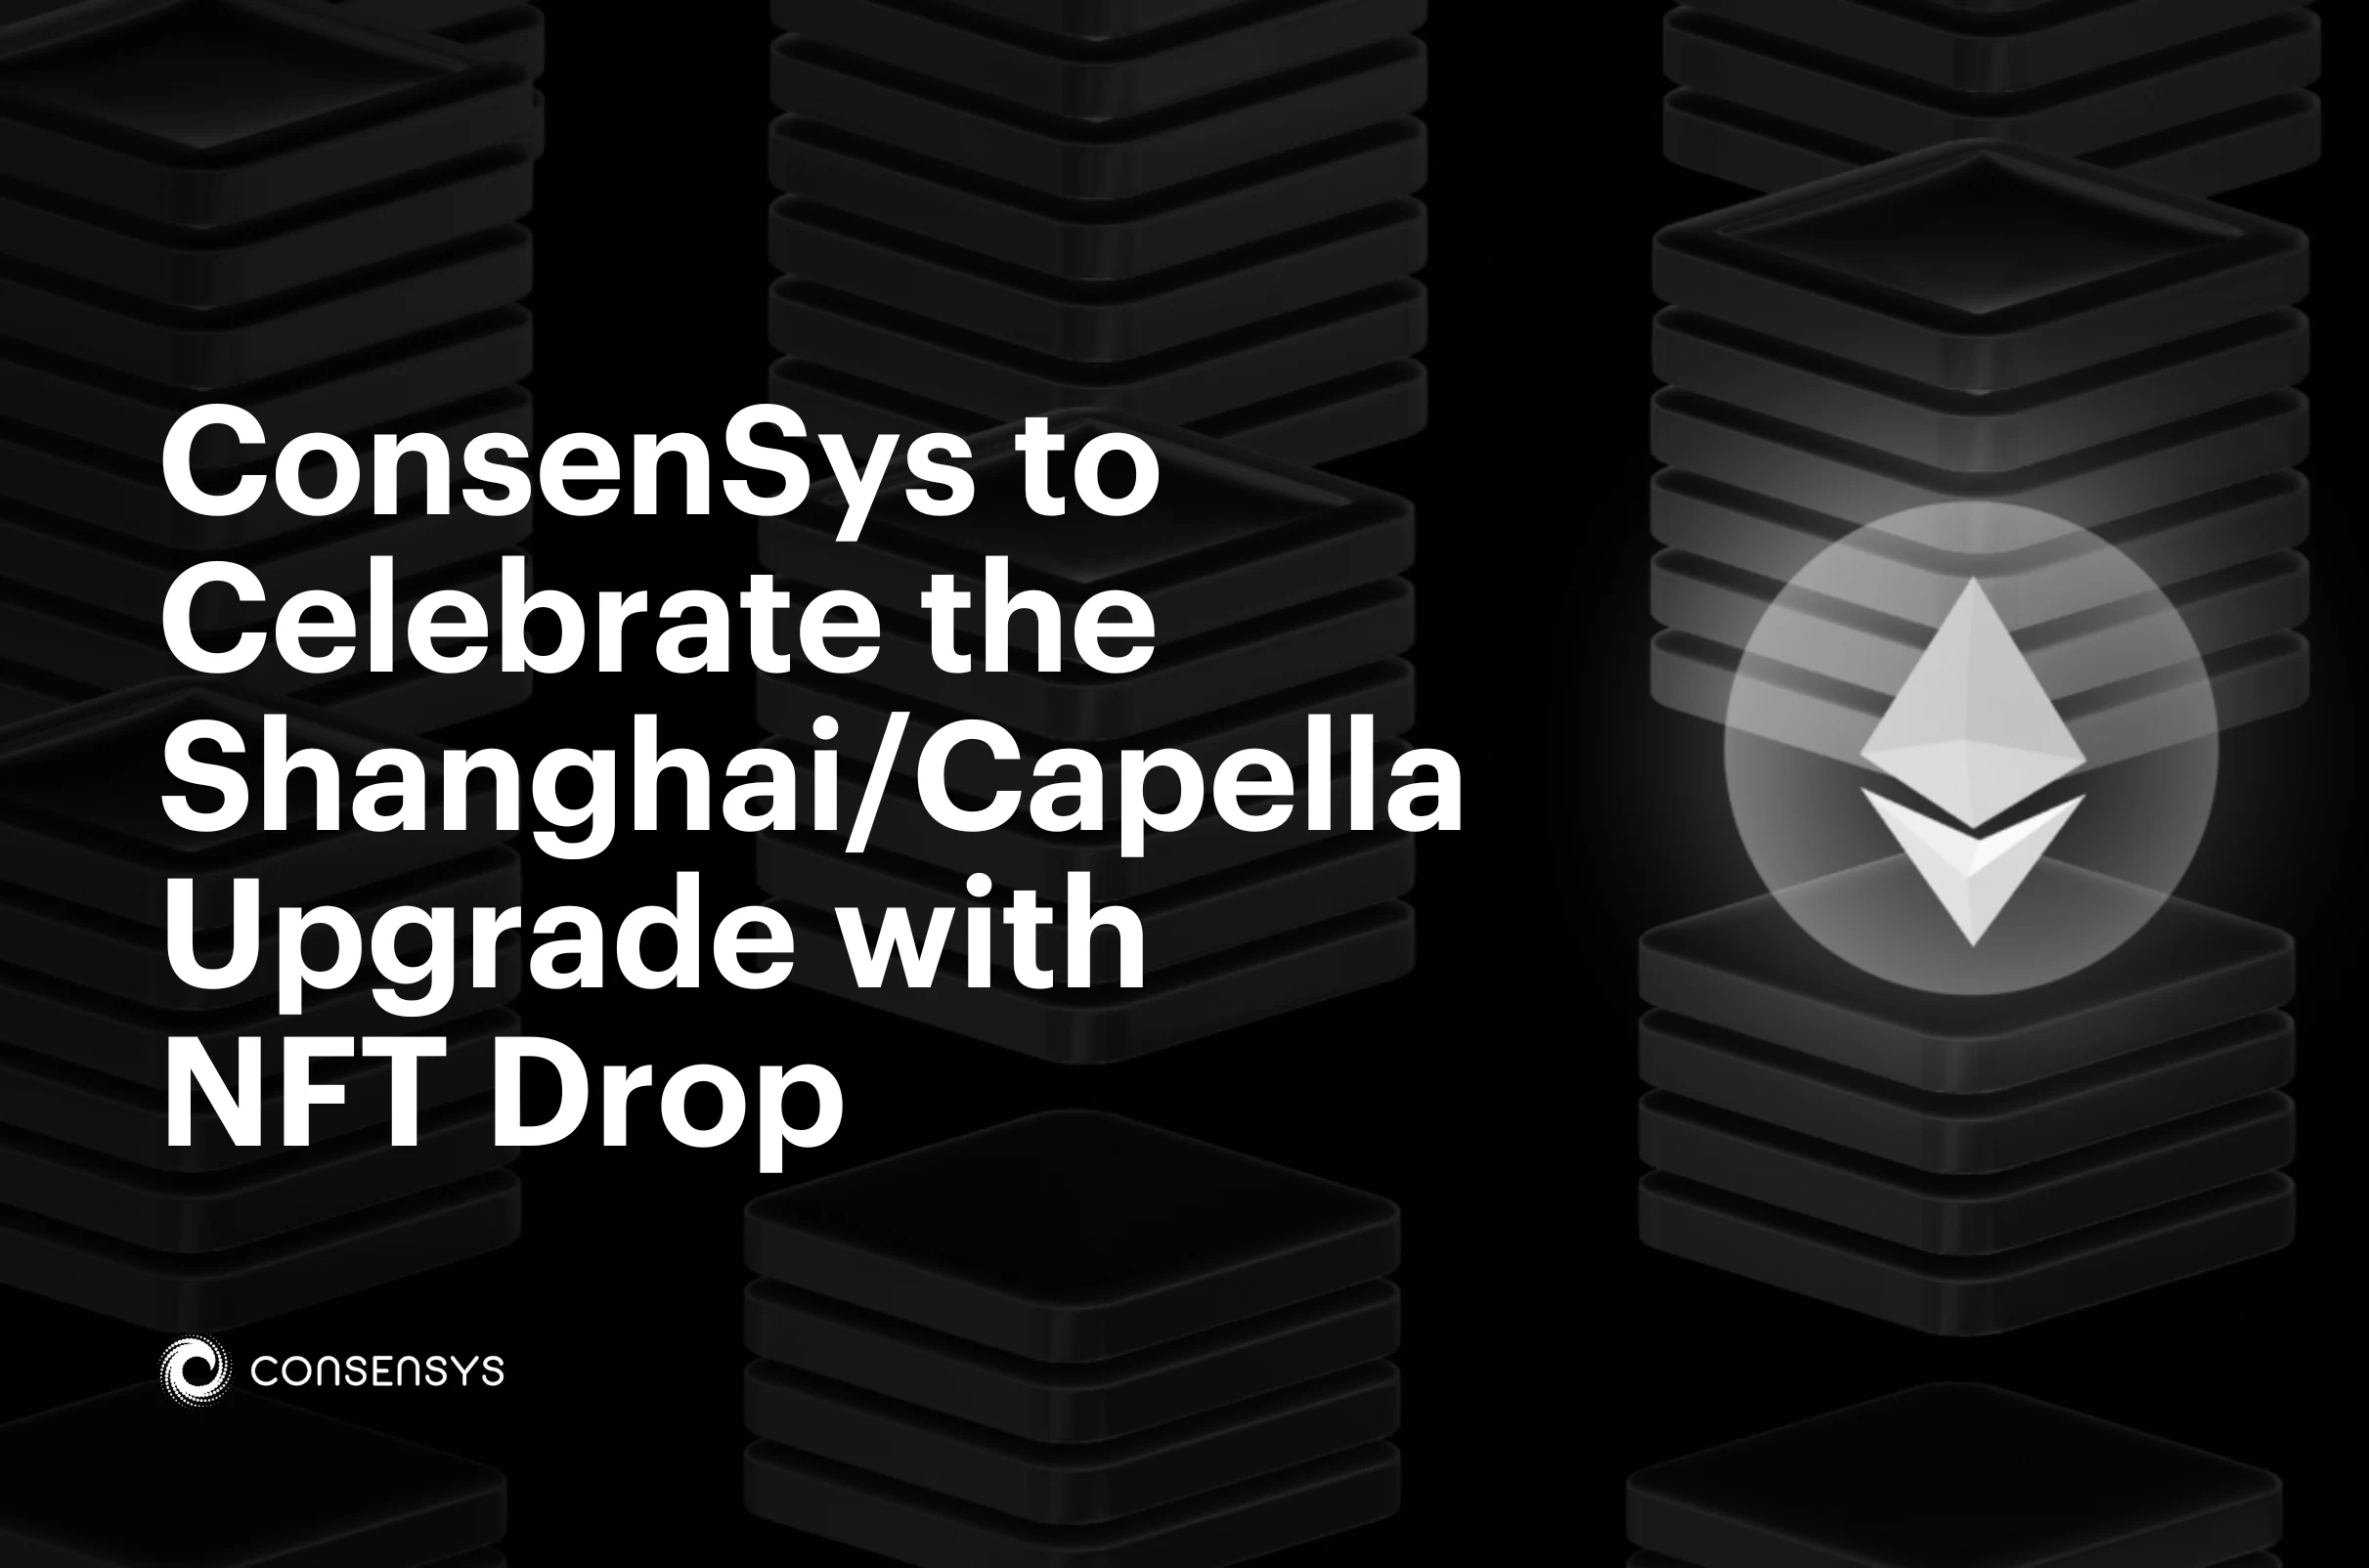 Shanghai/Capella Upgrade: Consensys to Celebrate the Milestone with NFT Drop